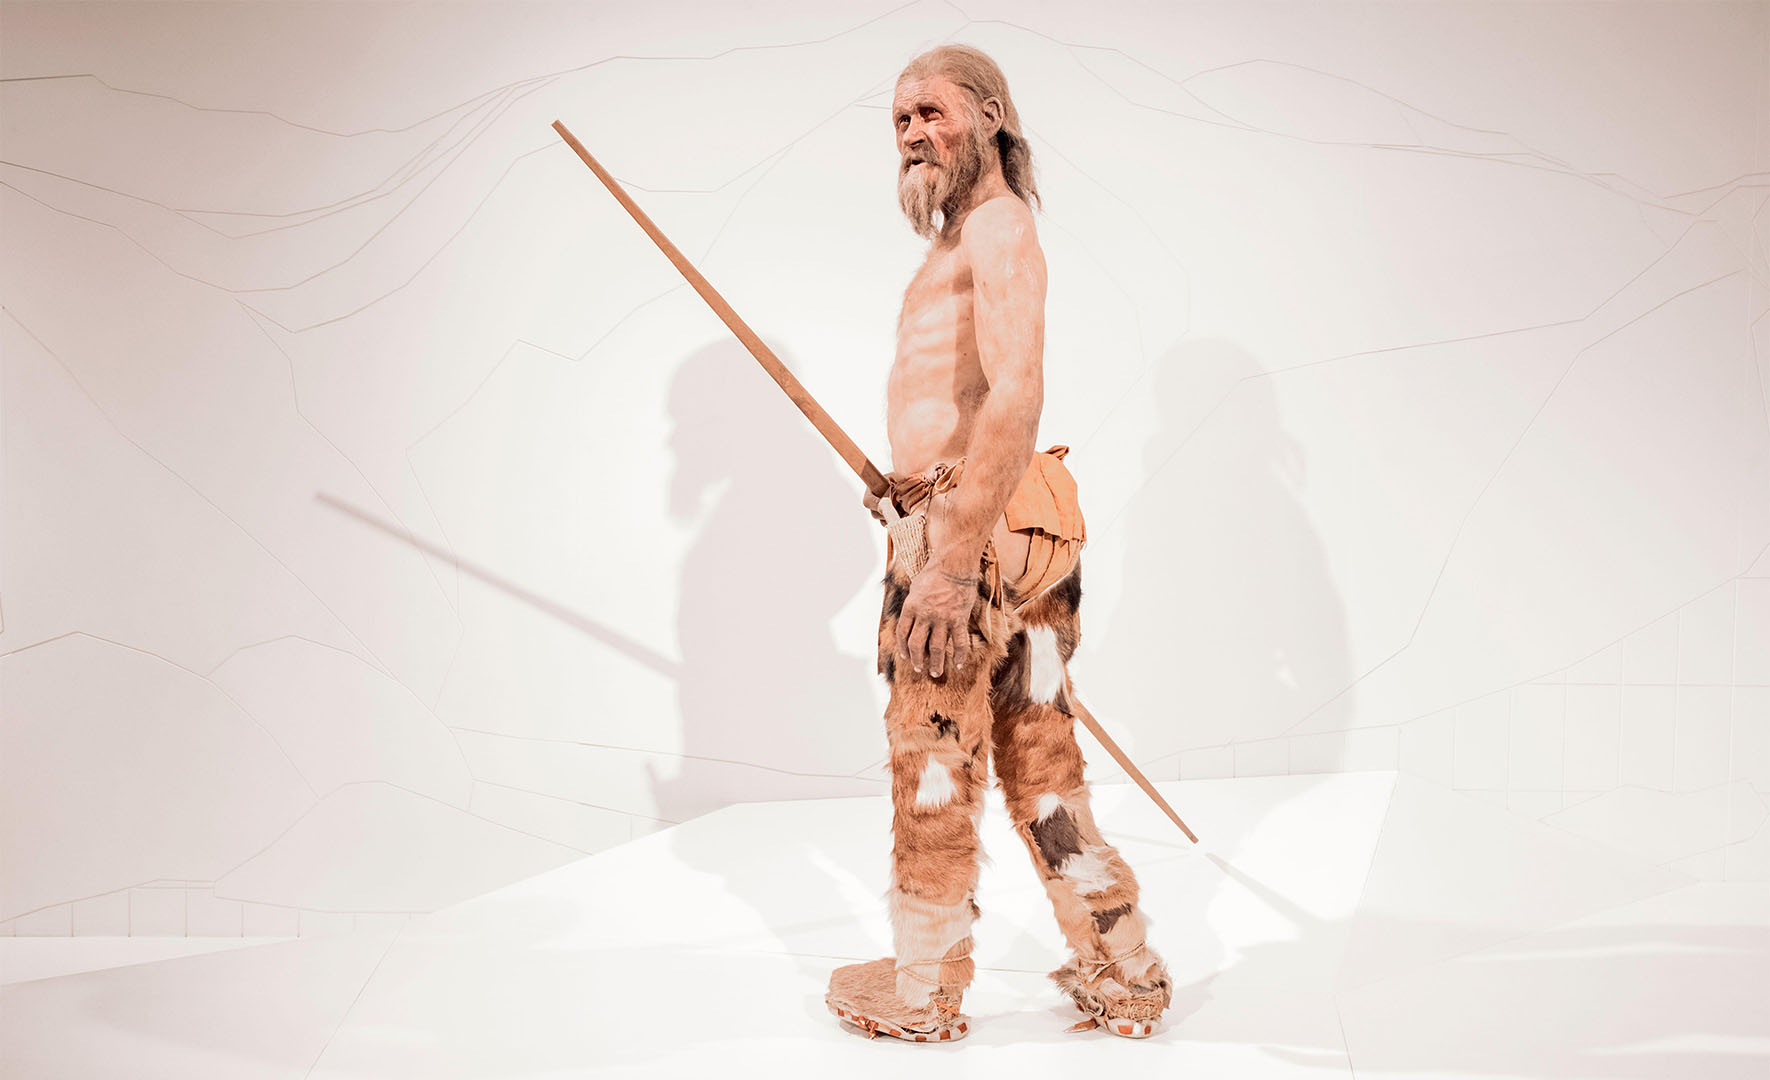 A reconstruction of Ötzi the Iceman shows what he may have looked like, although a recent study suggests he had darker skin.